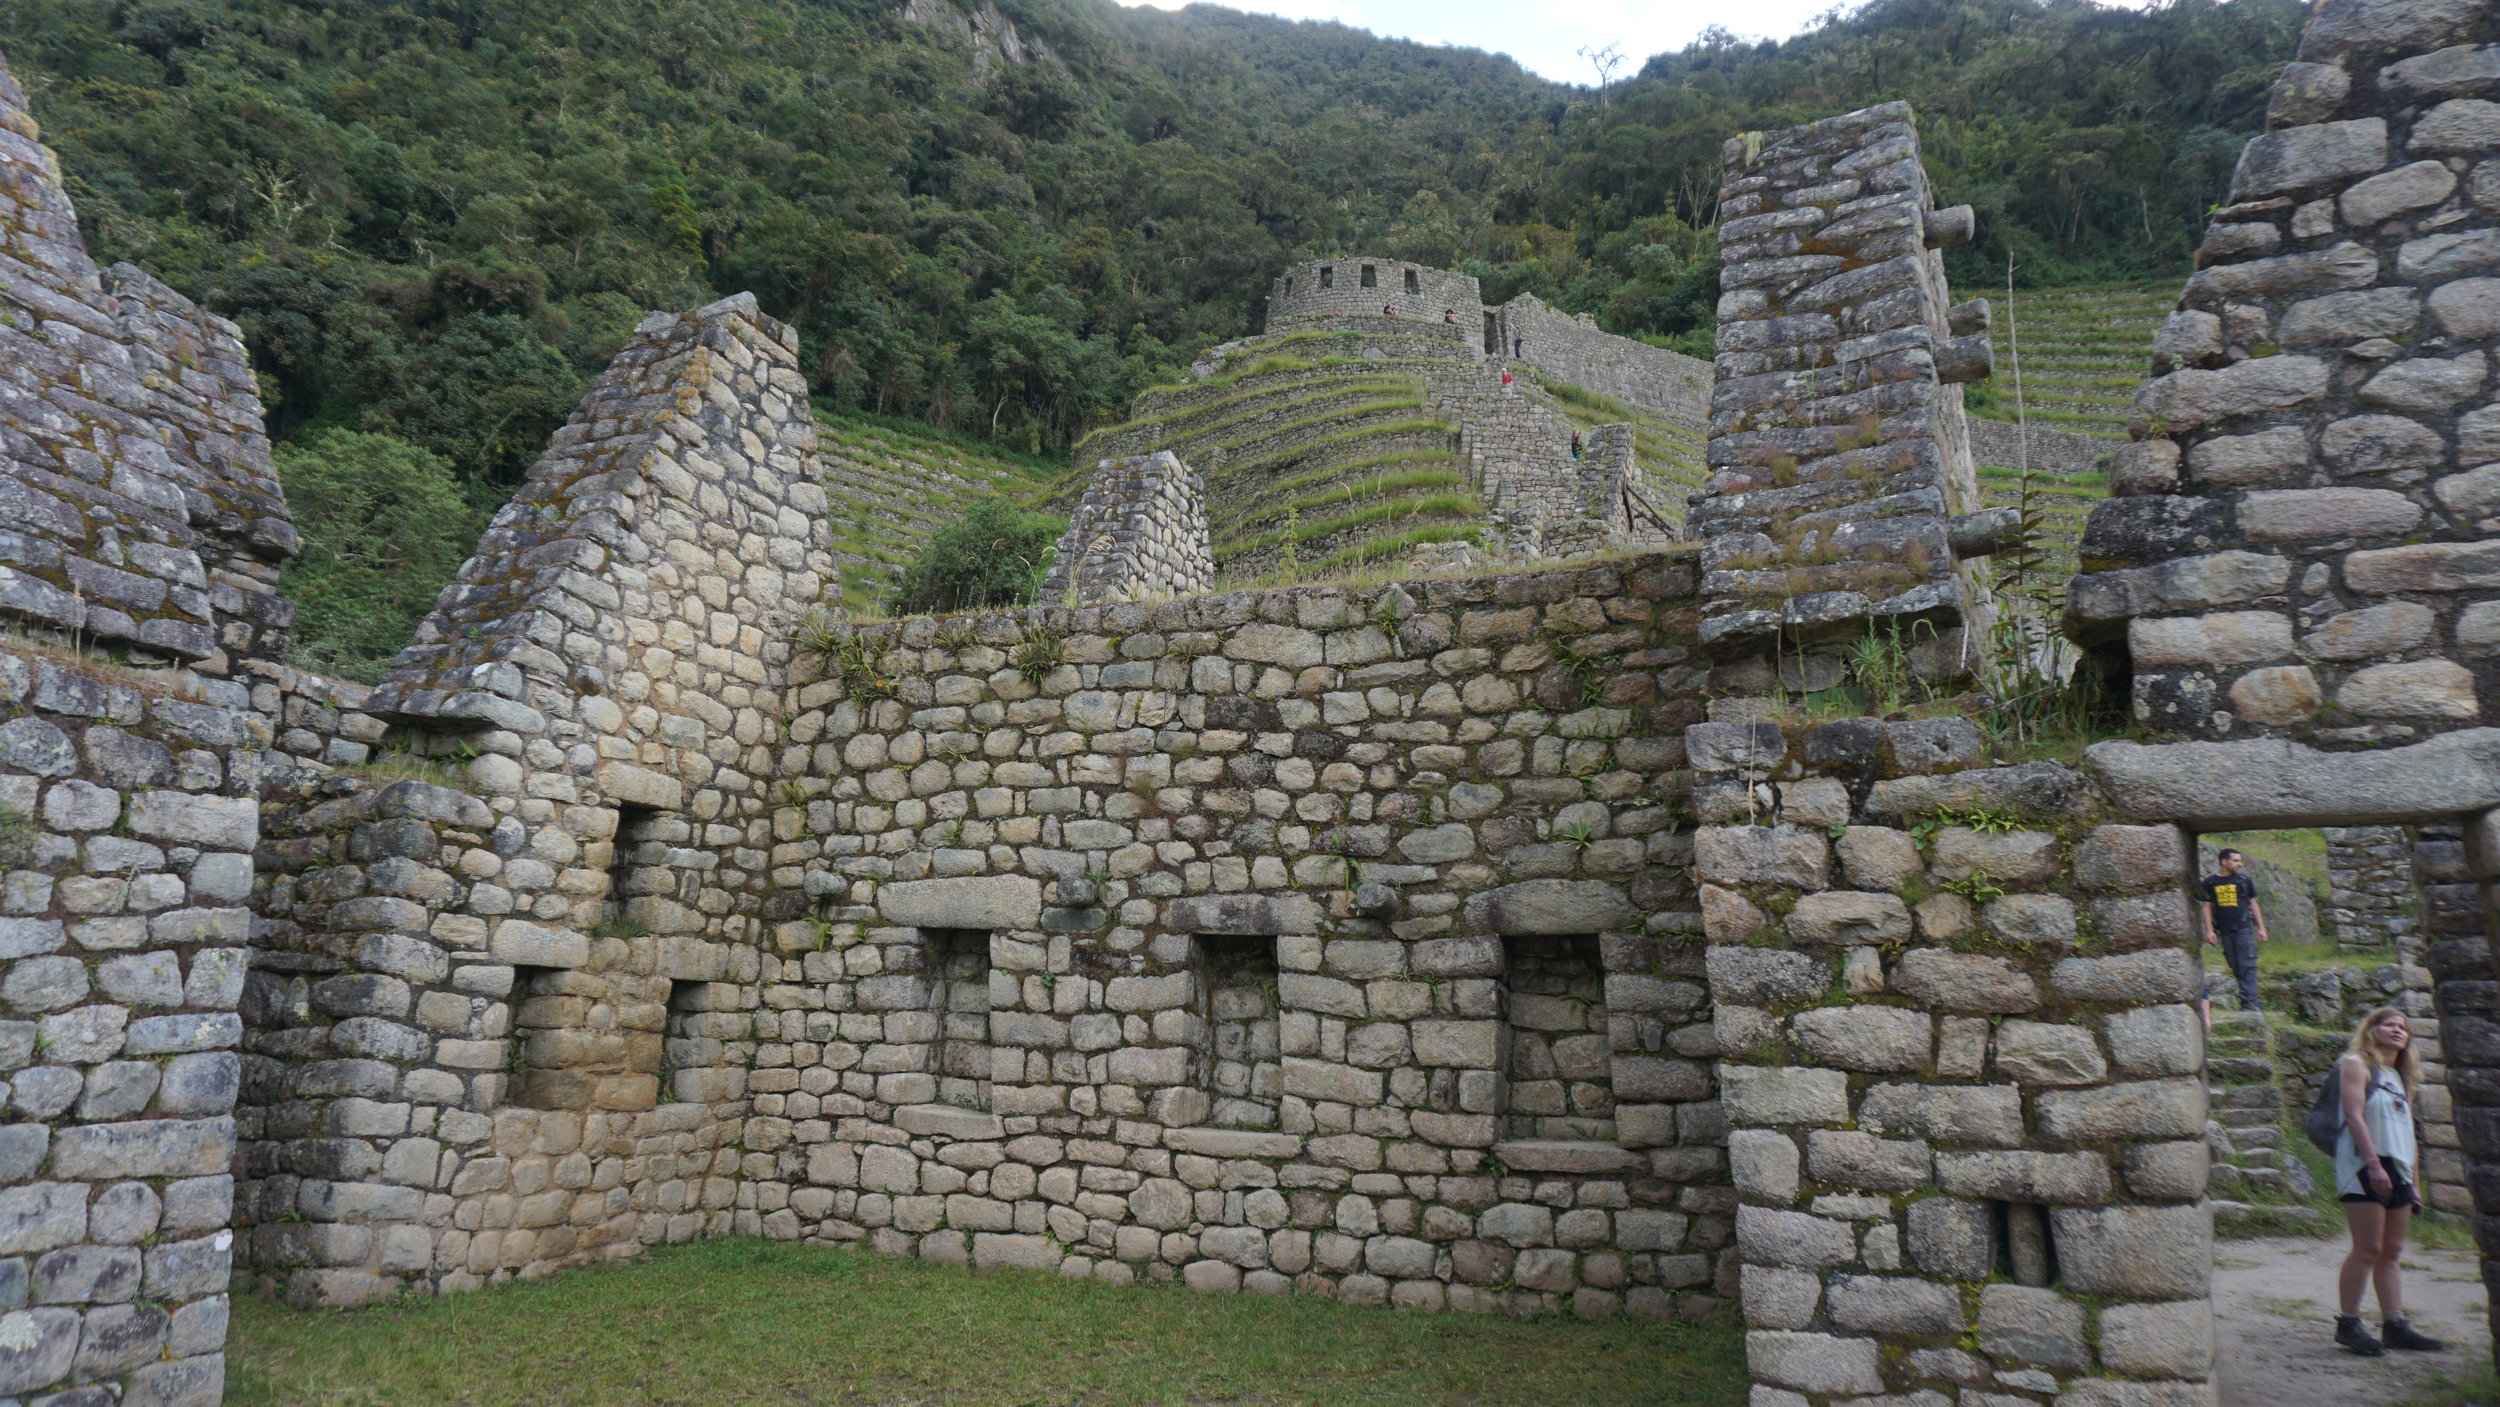 Gable roof style at Wiñay Wayna housing structure